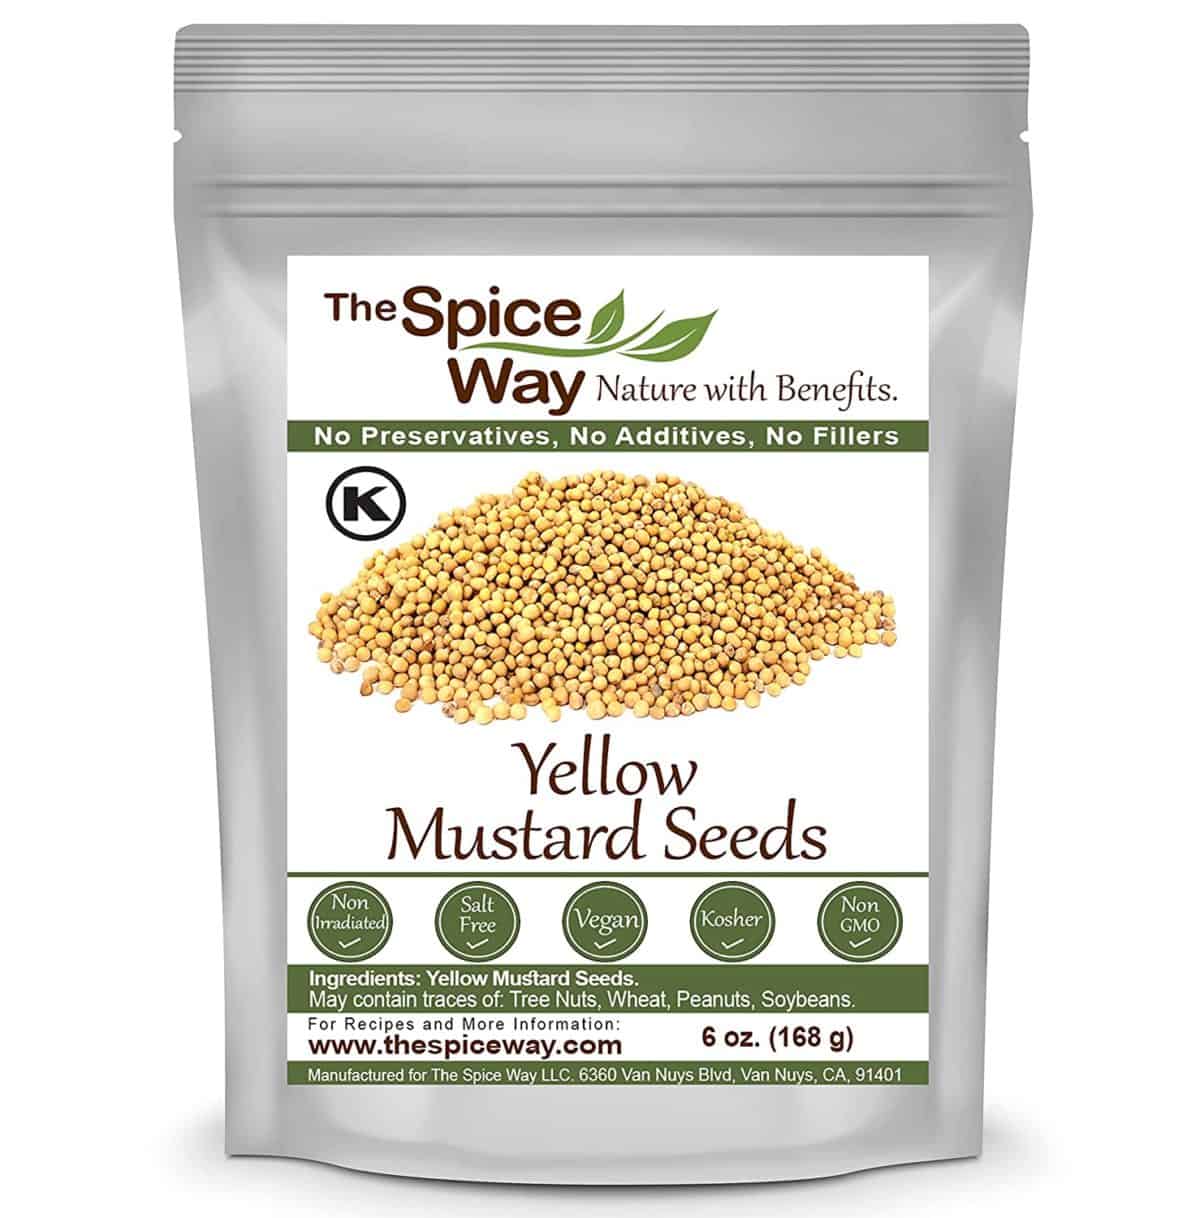 Mustard seeds as a substitute for mustard powder